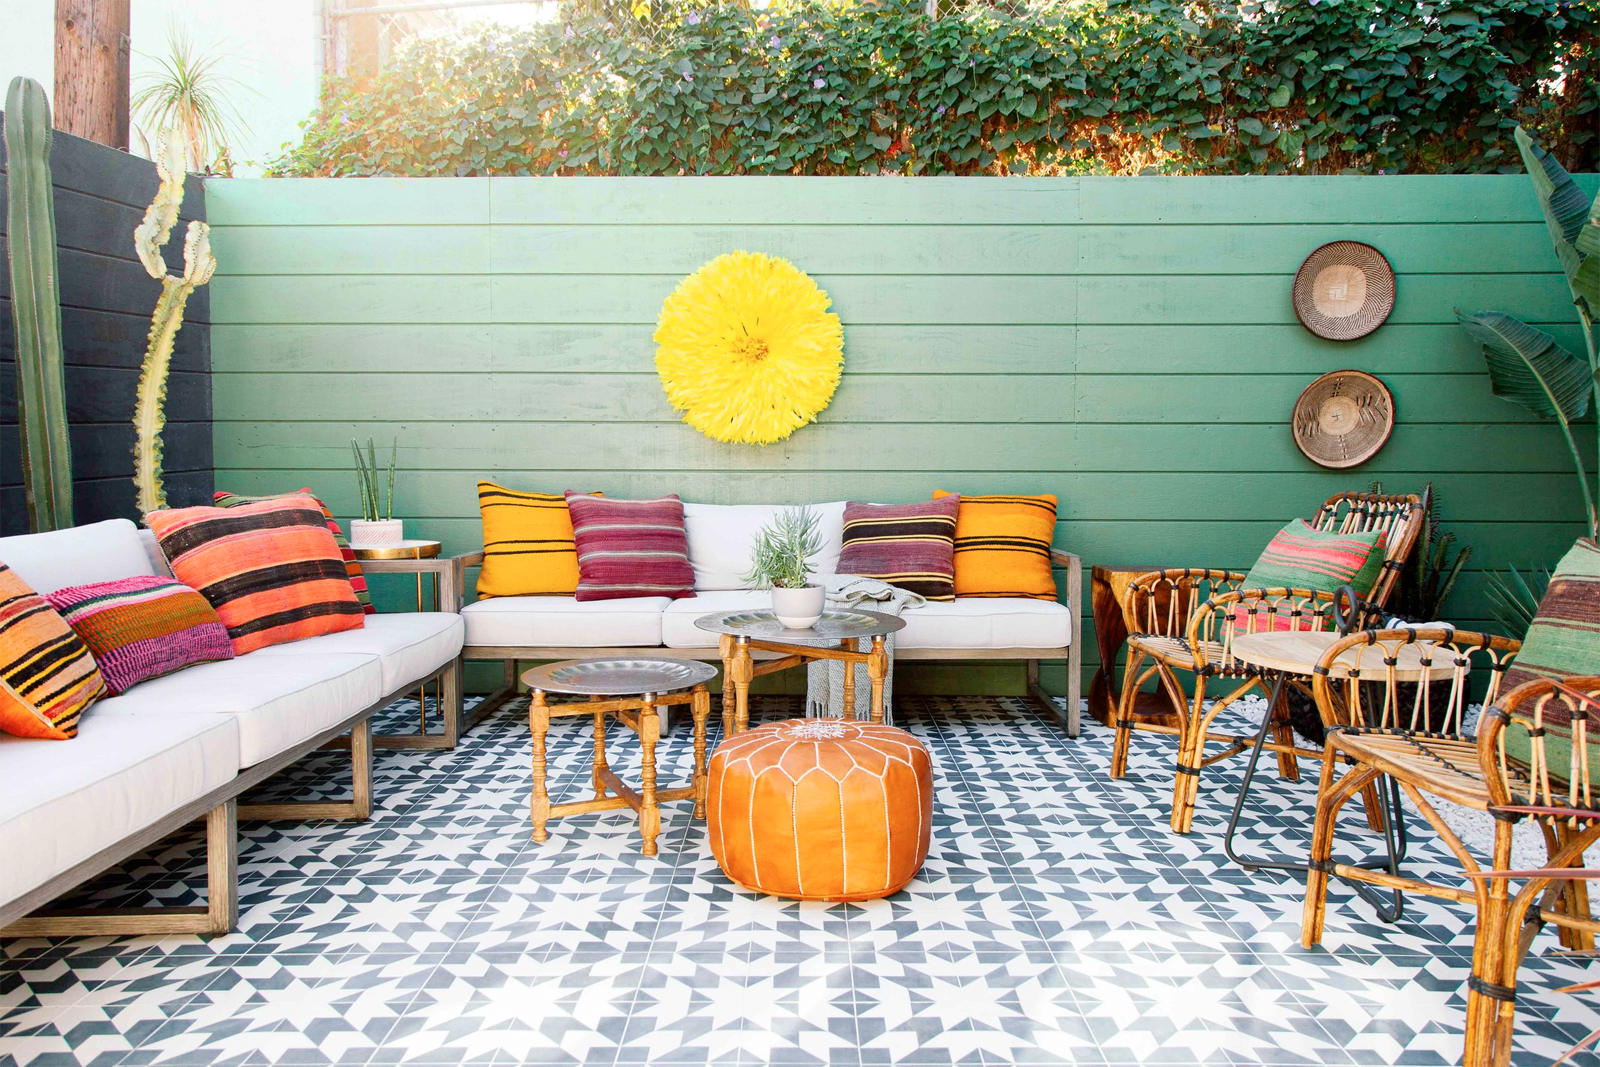 Small Patio Decorating Ideas | Fast-Growing Climbing Vines ...